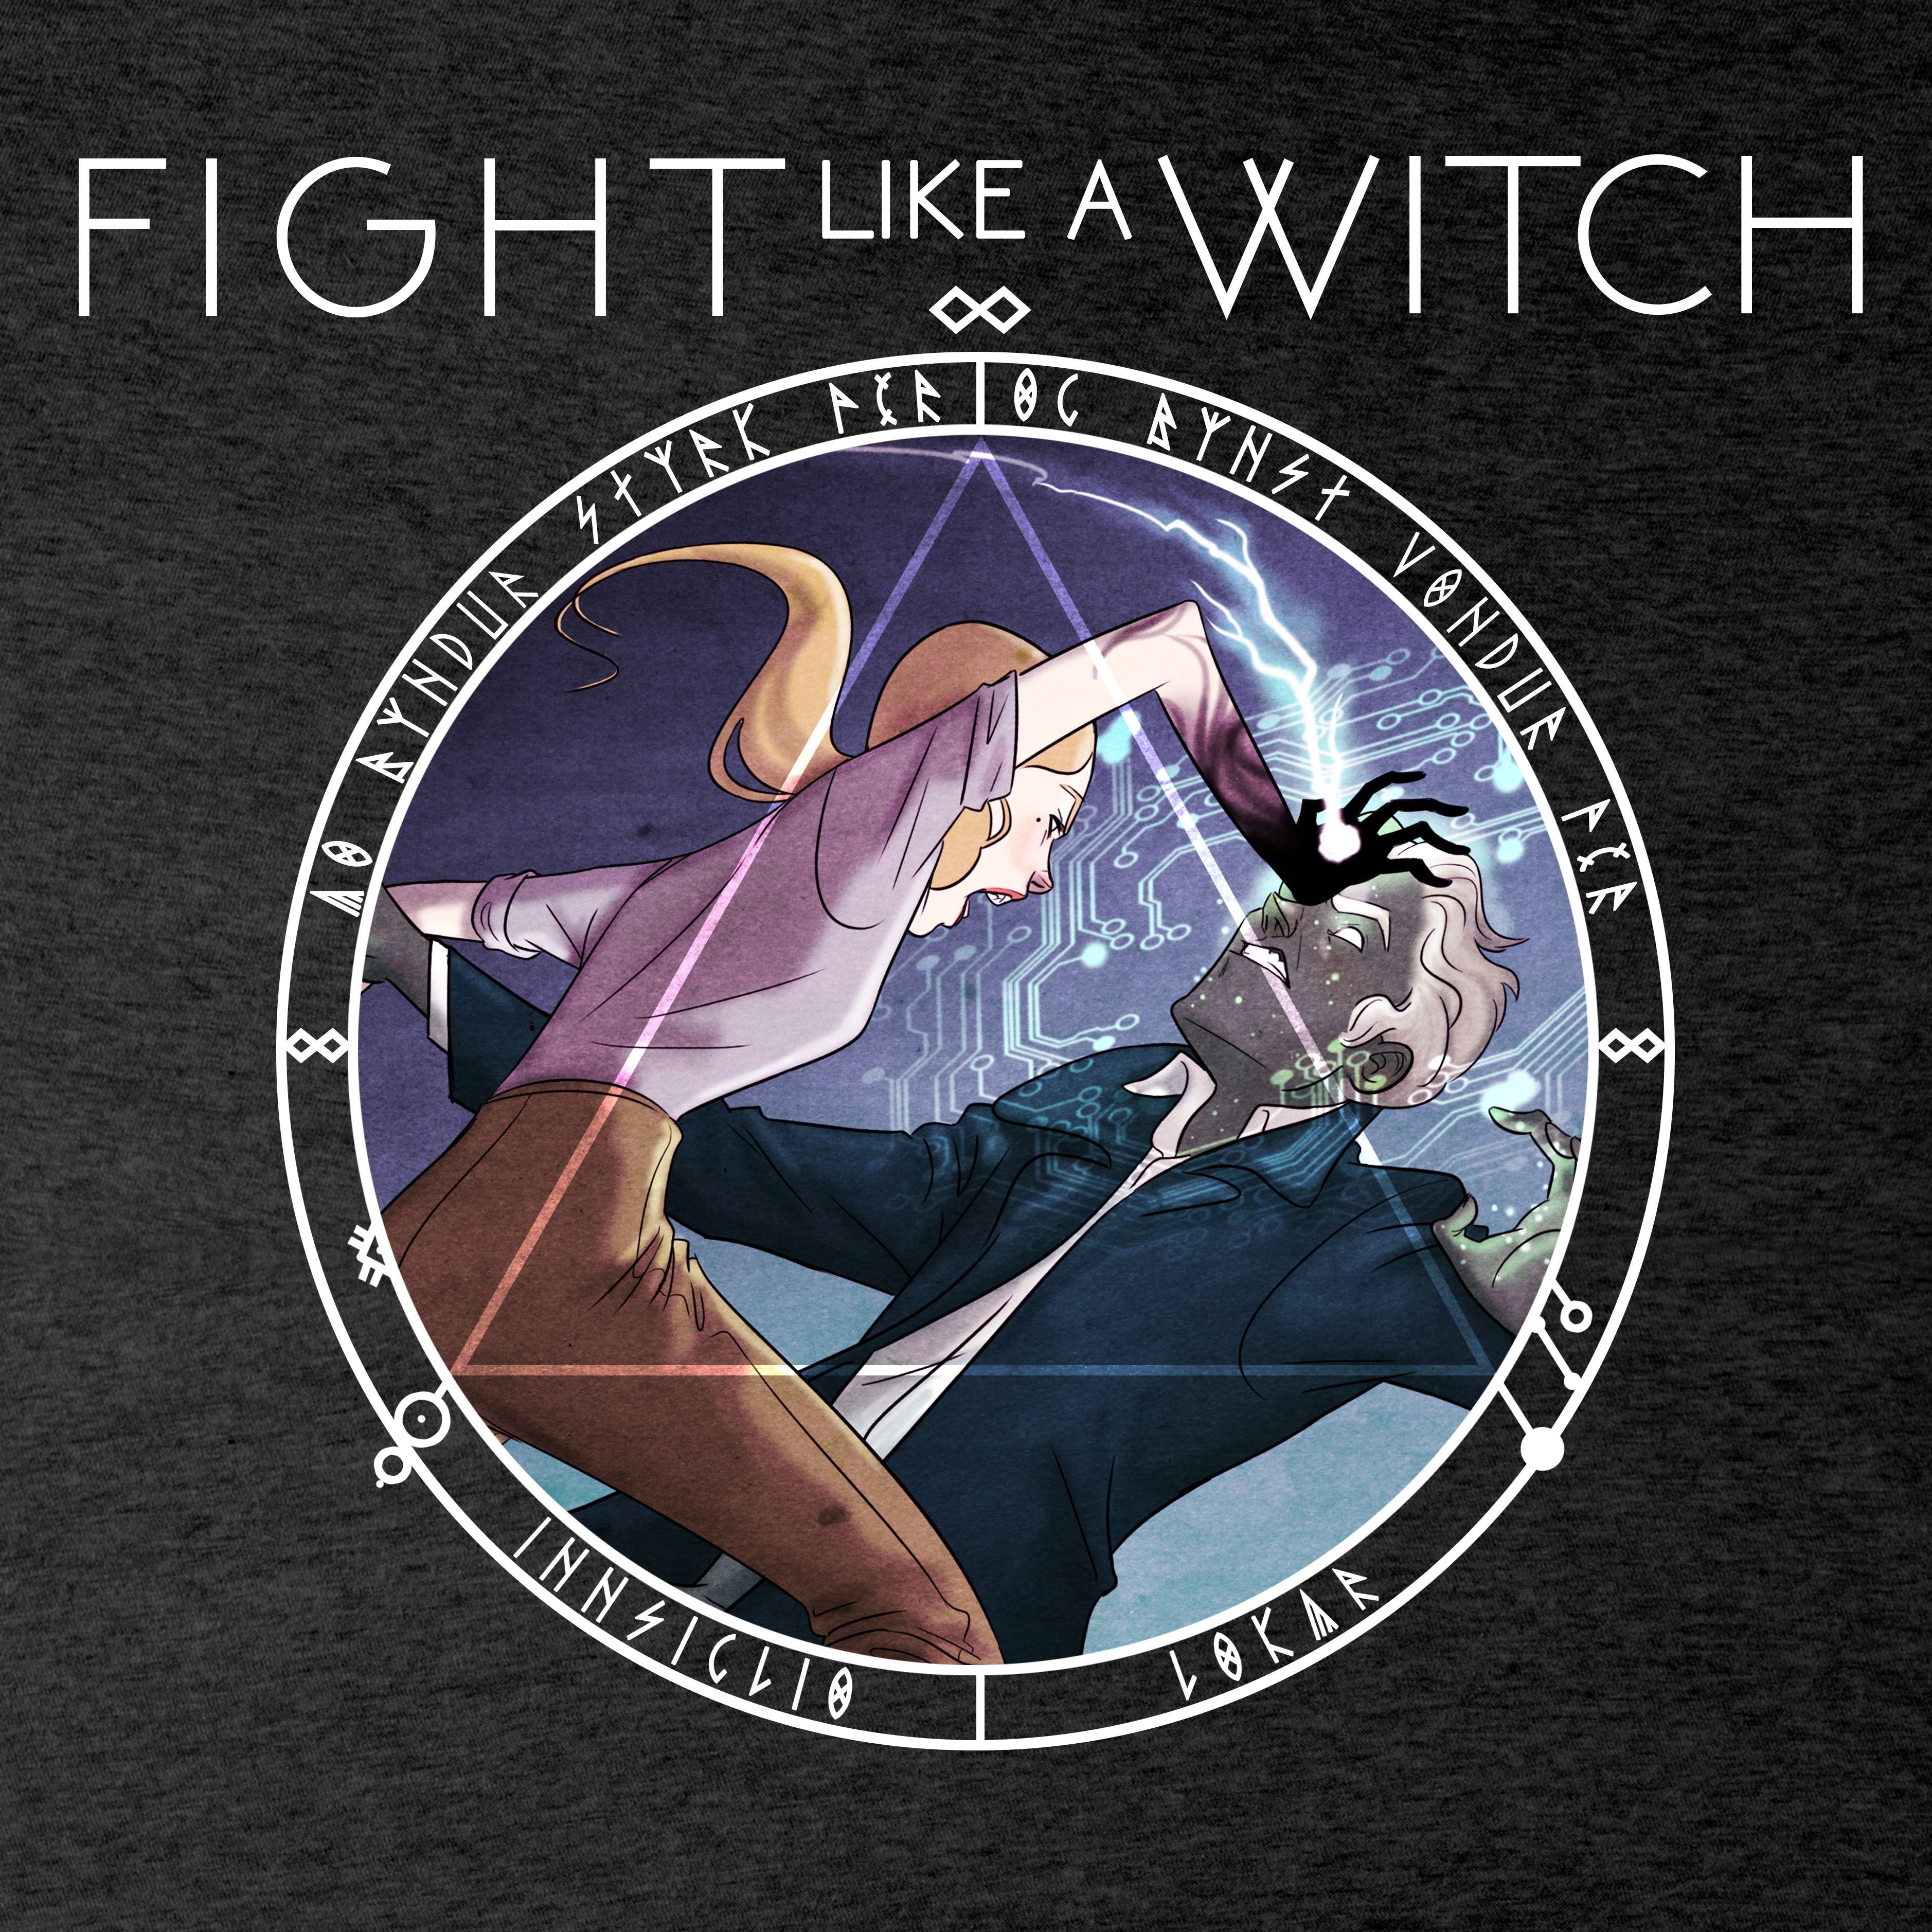 FIGHT LIKE A WITCH - Elanor Tank